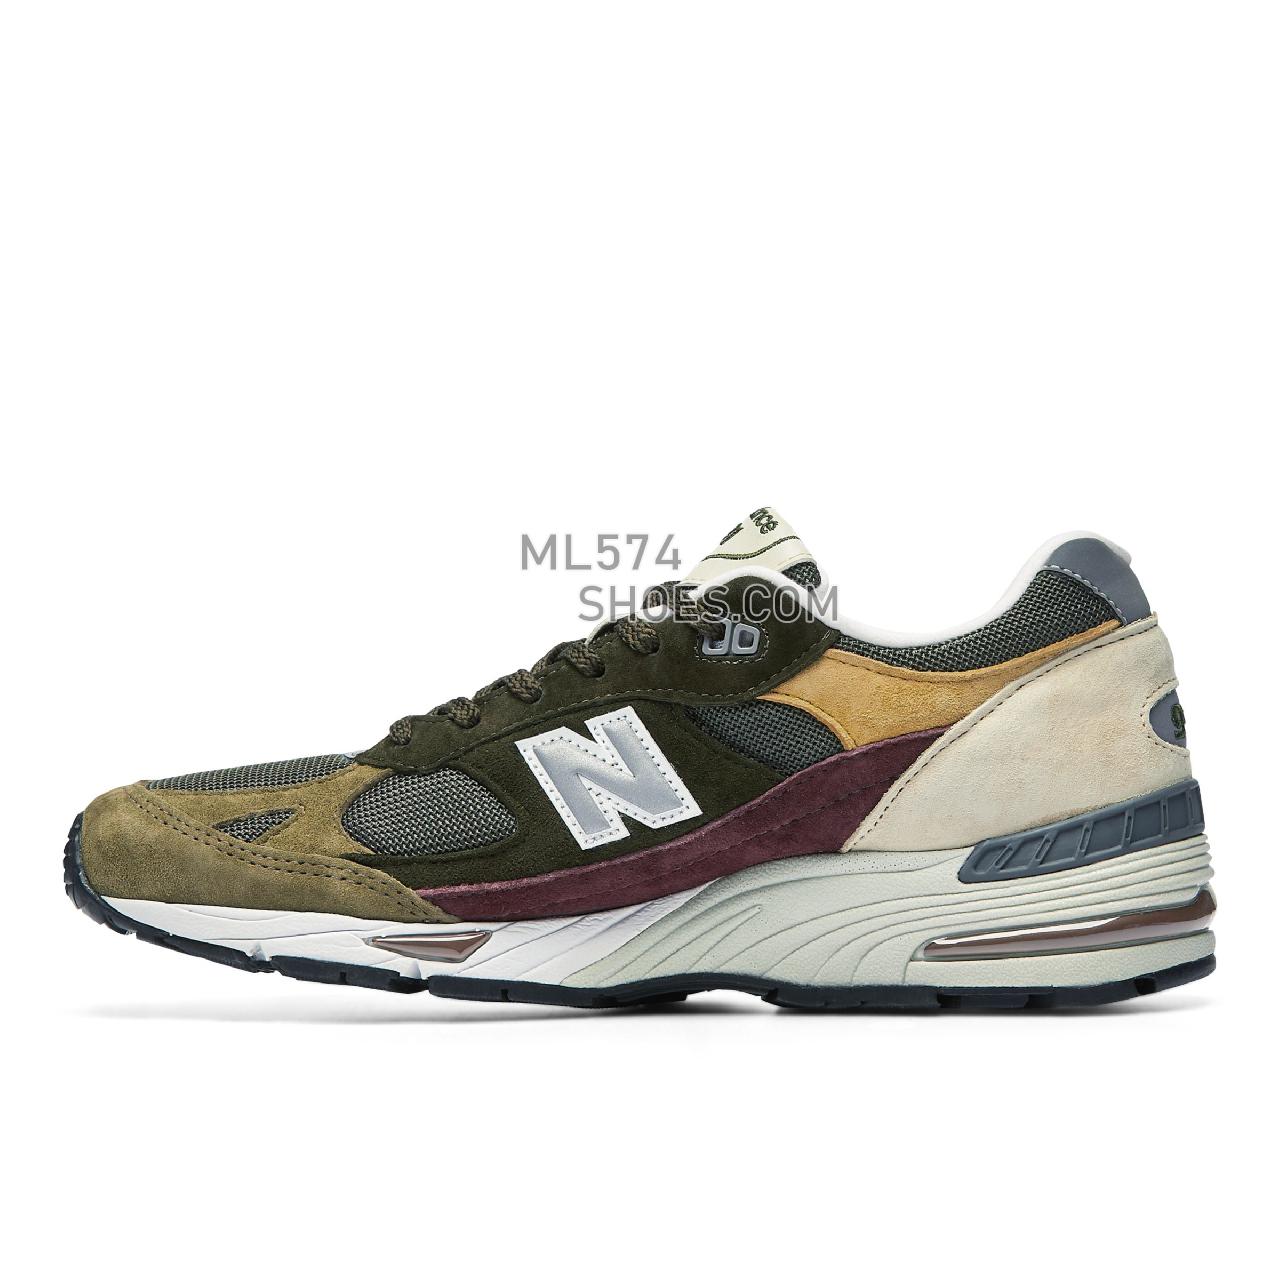 New Balance Made in UK 991 - Men's Made in USA And UK Sneakers - Green with Wine and Yellow - M991GYB